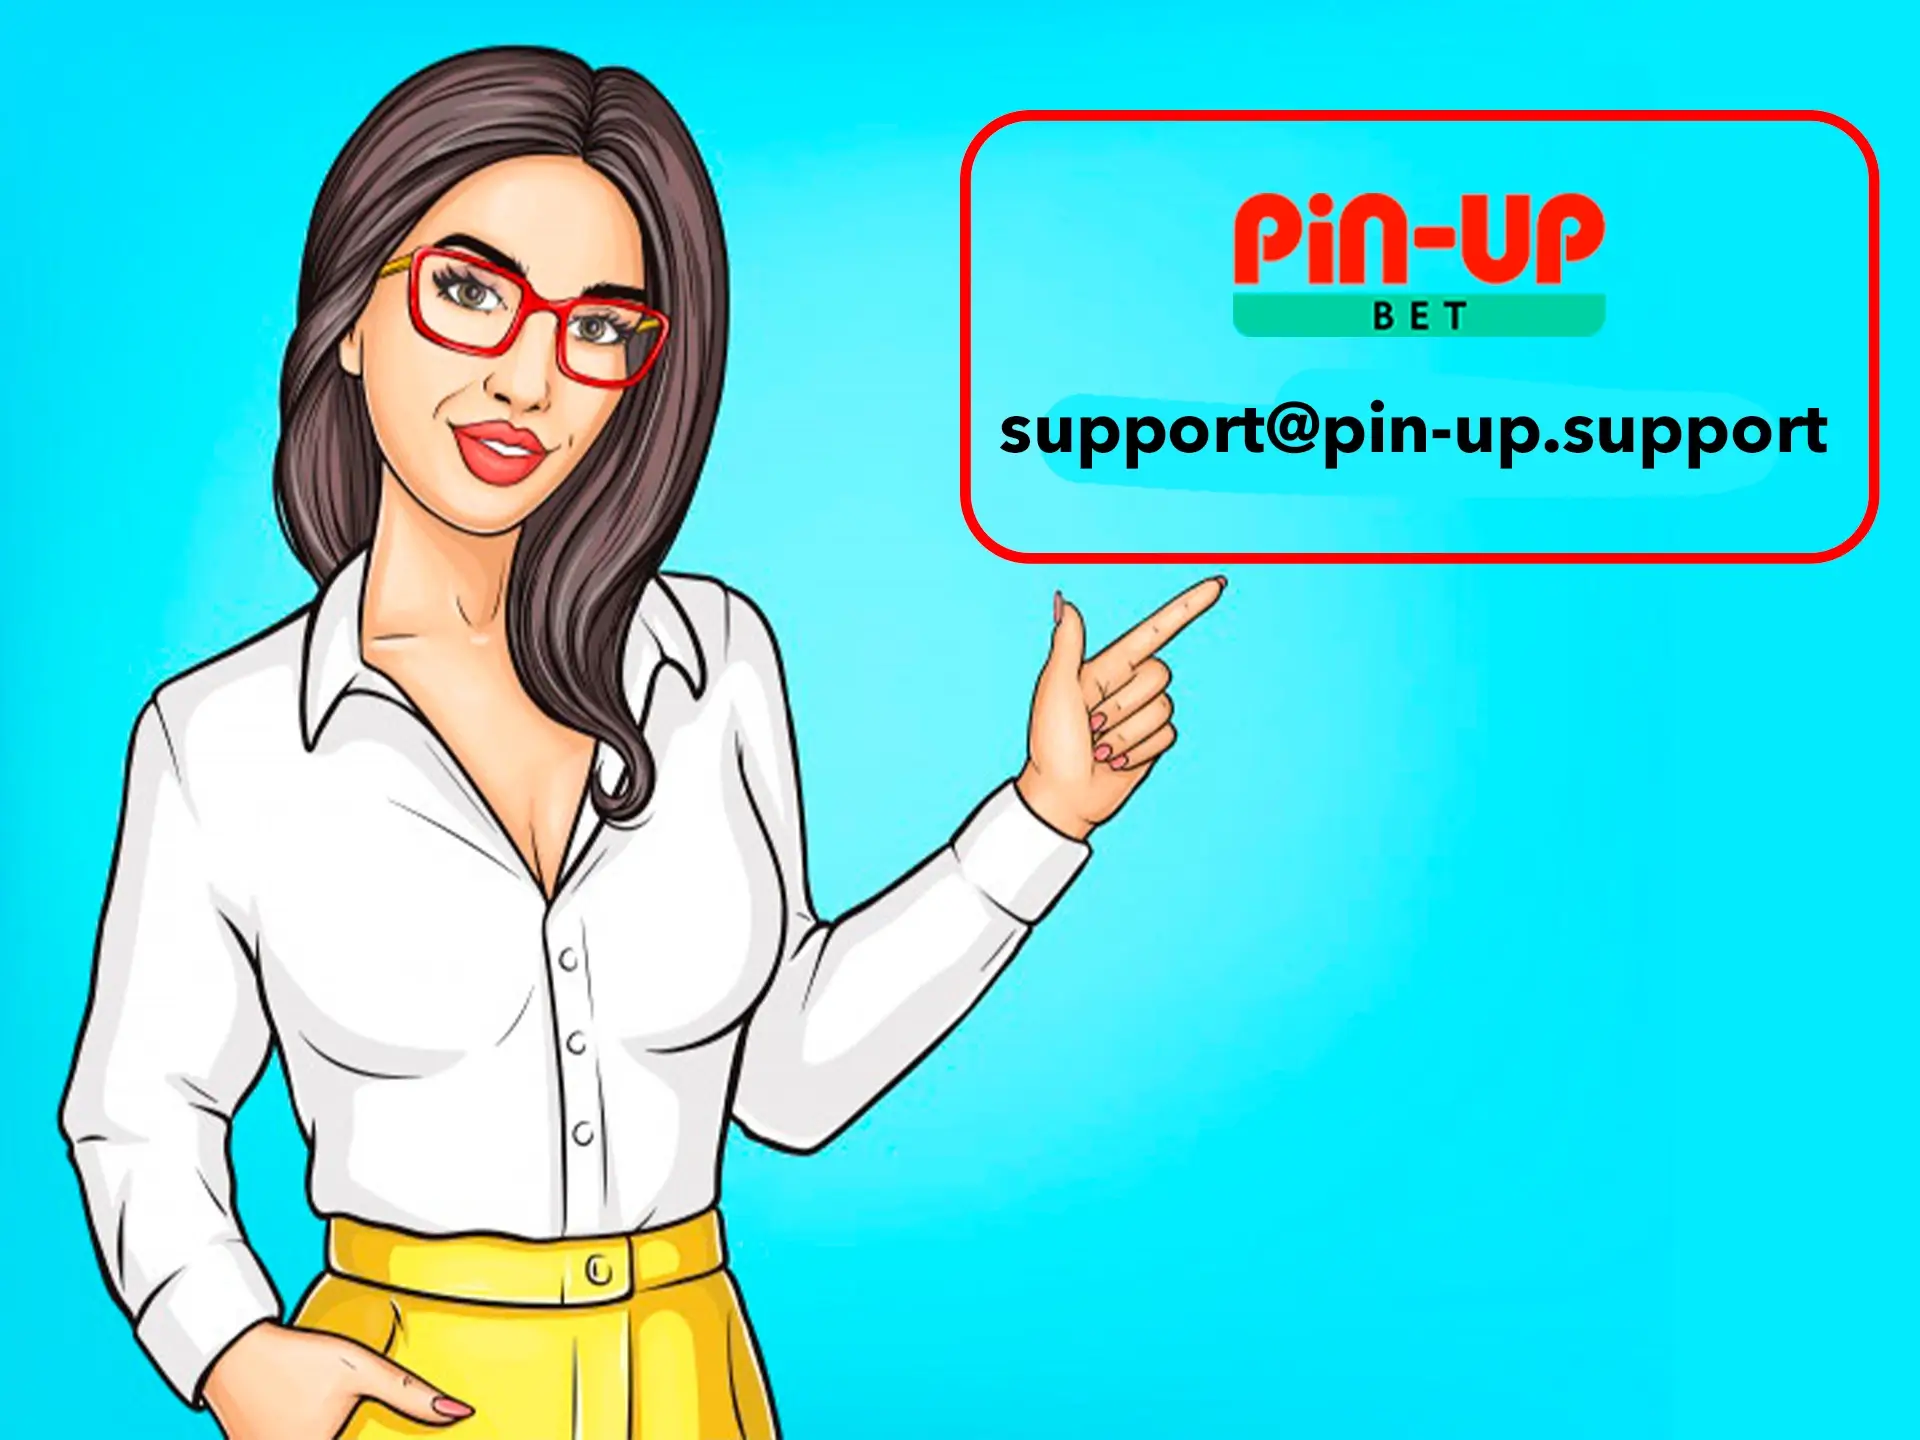 Write an email and descrive your problem to the Pin Up support team.